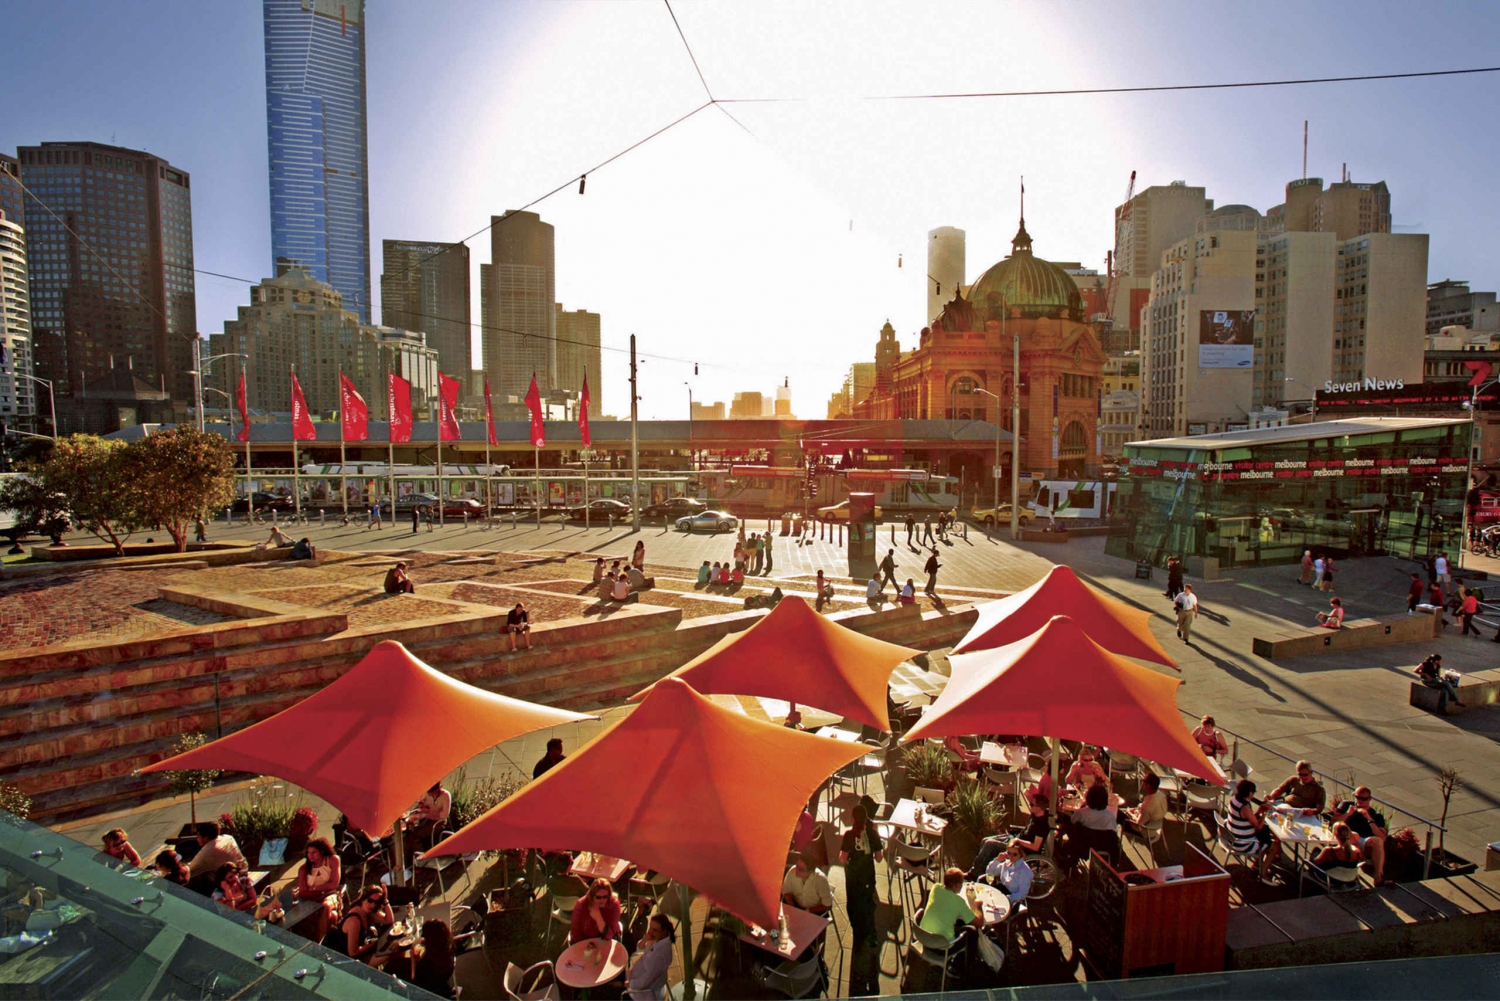 Melbourne City Tour with Scenic Yarra River Cruise